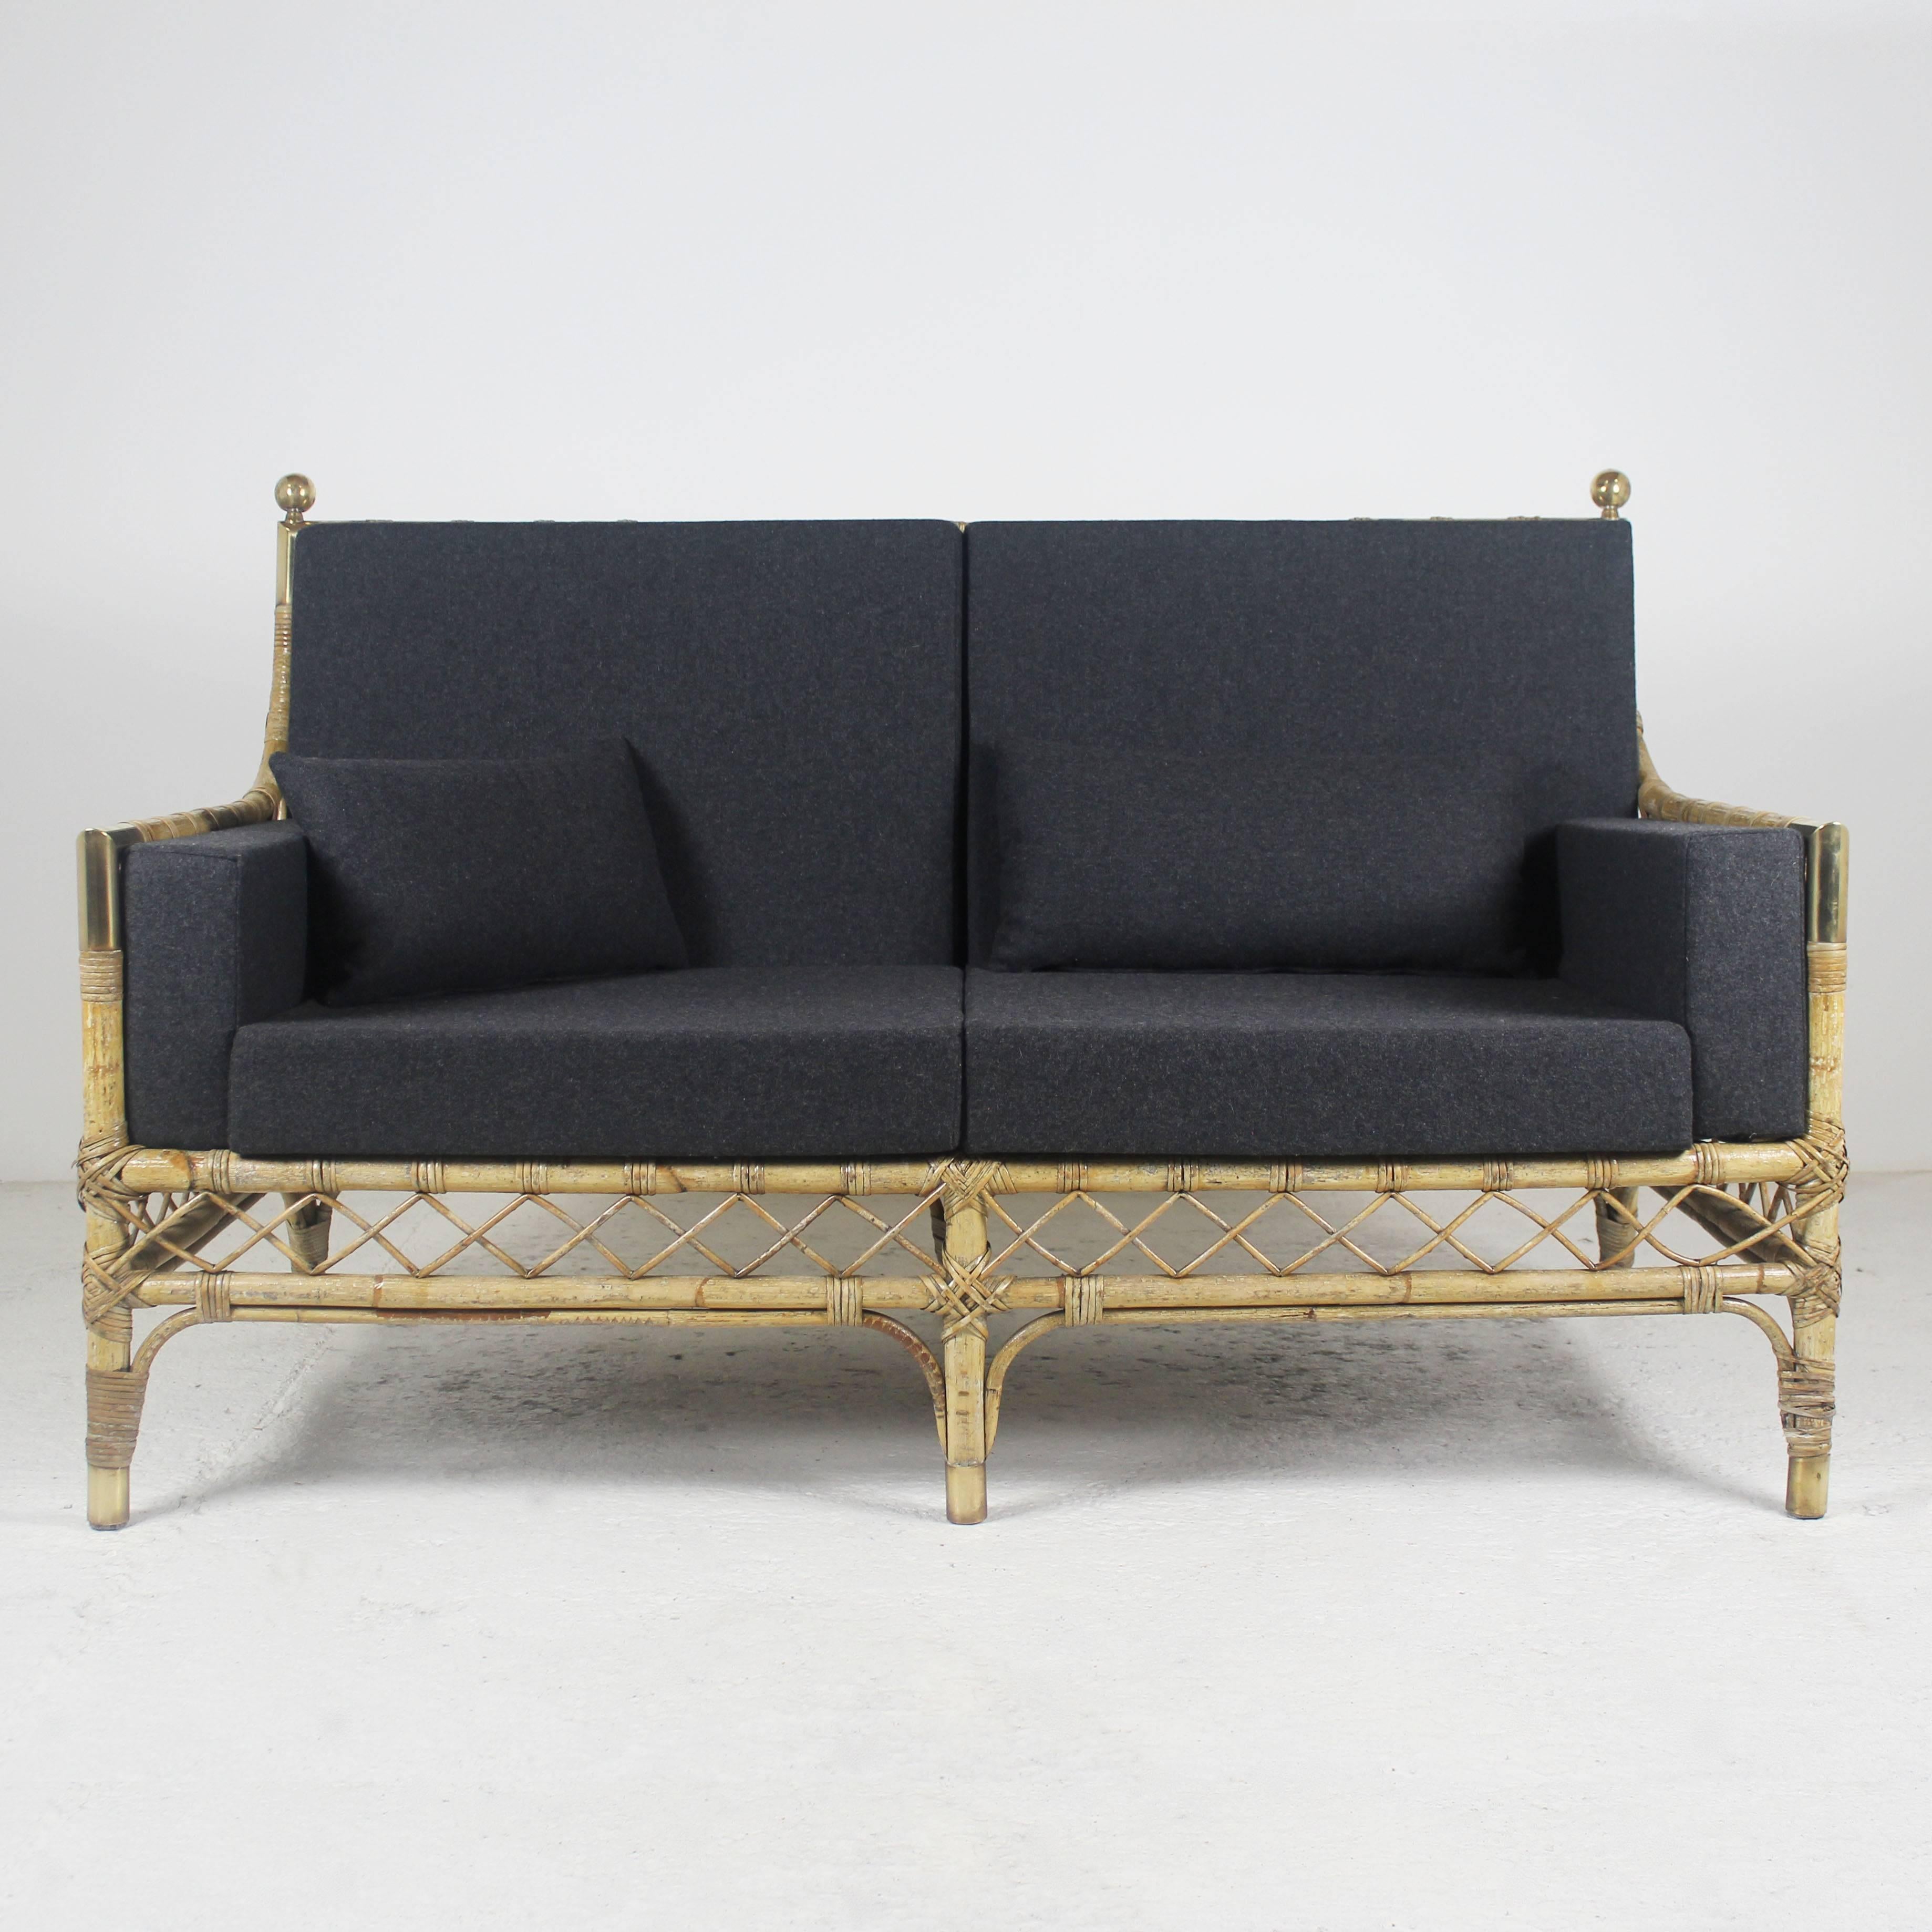 A 1960s sofa in bamboo, rattan and golden brass. Removable covers’ cushions in a totally redone charcoal grey fabric.